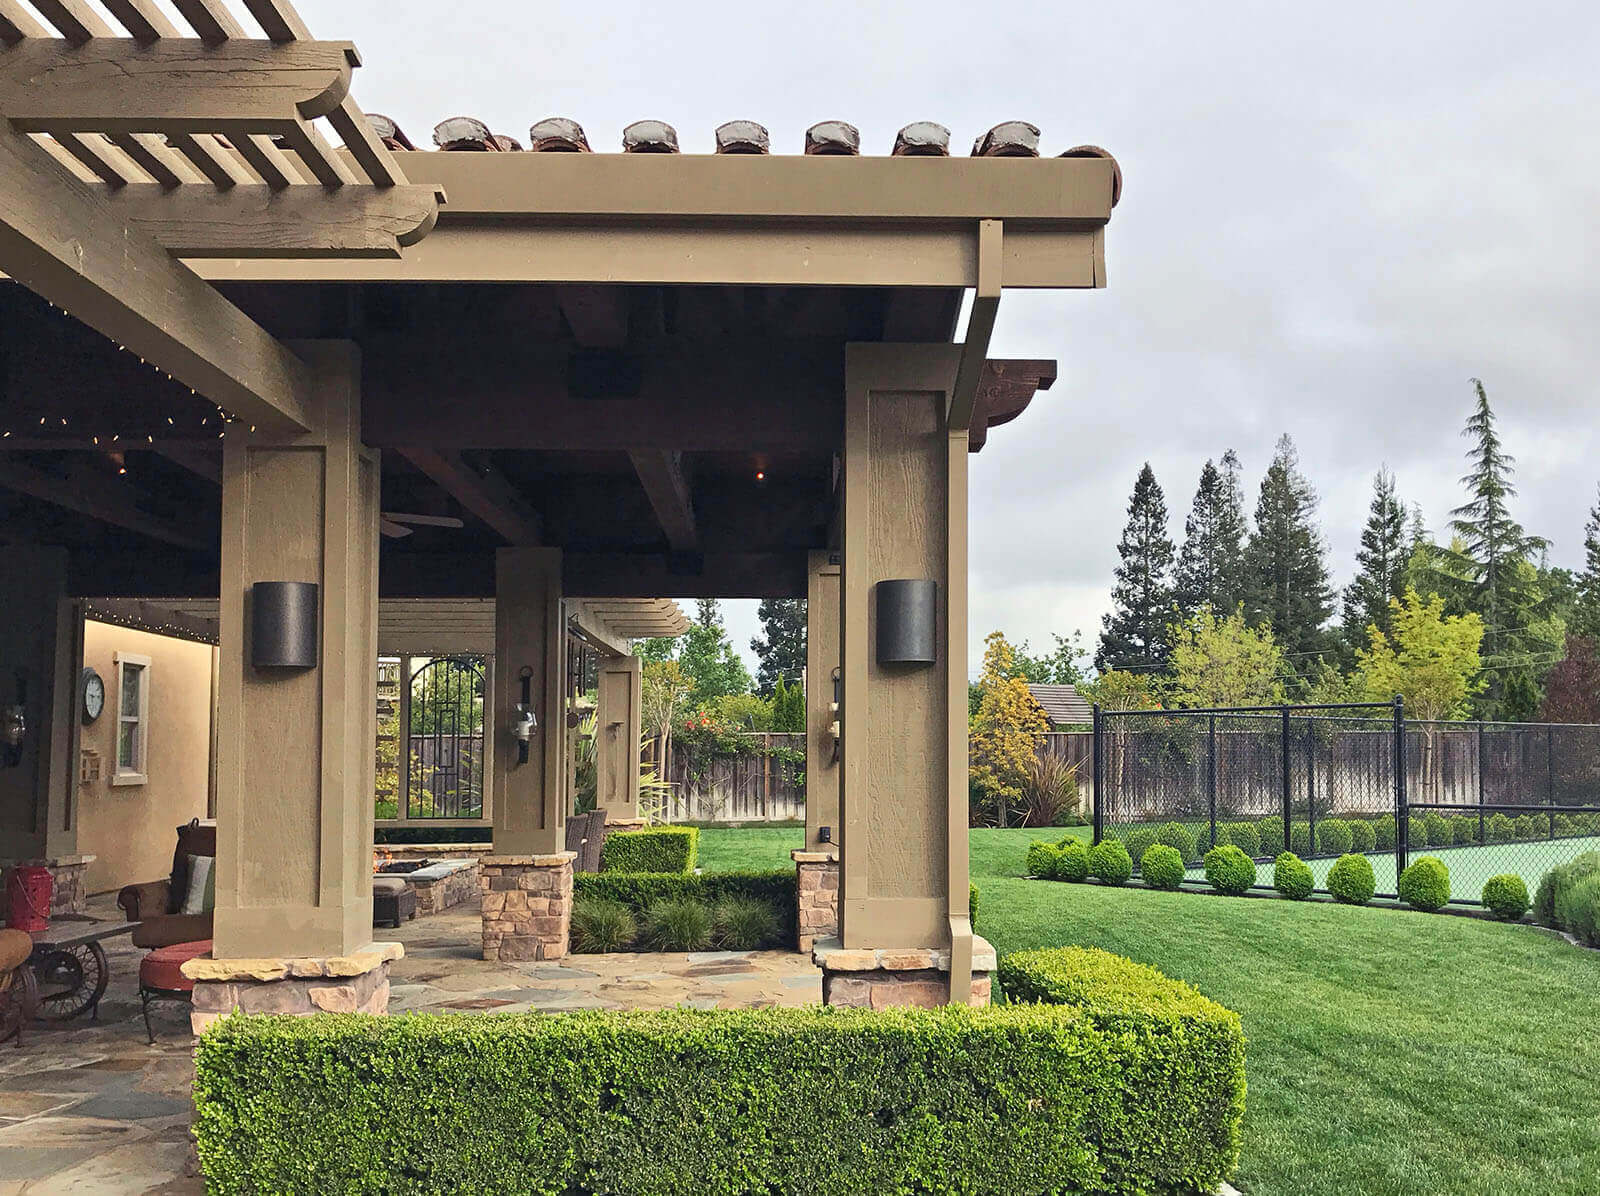 Tiered veranda with slatted roof and connected all-weather structure with Mission-style roof tiles and metal sconce lighting shelters a stone patio with traditional boxwood hedge